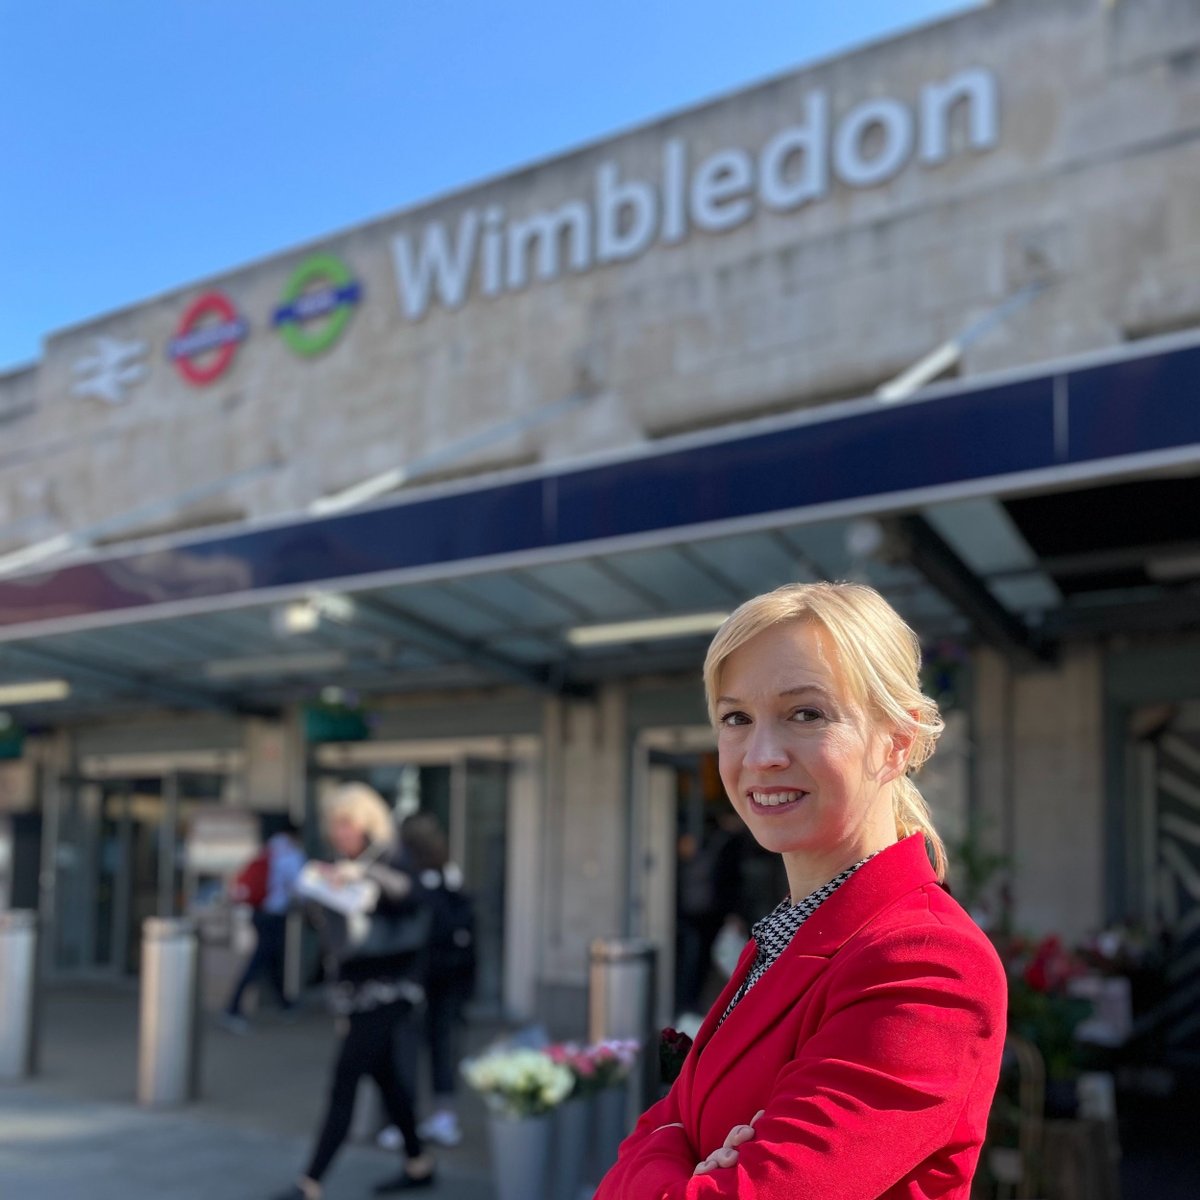 Cllr Eleanor Stringer @eleanormerton1 has been selected as the next @WimbledonLabour candidate for the Wimbledon and Coombe constituency.